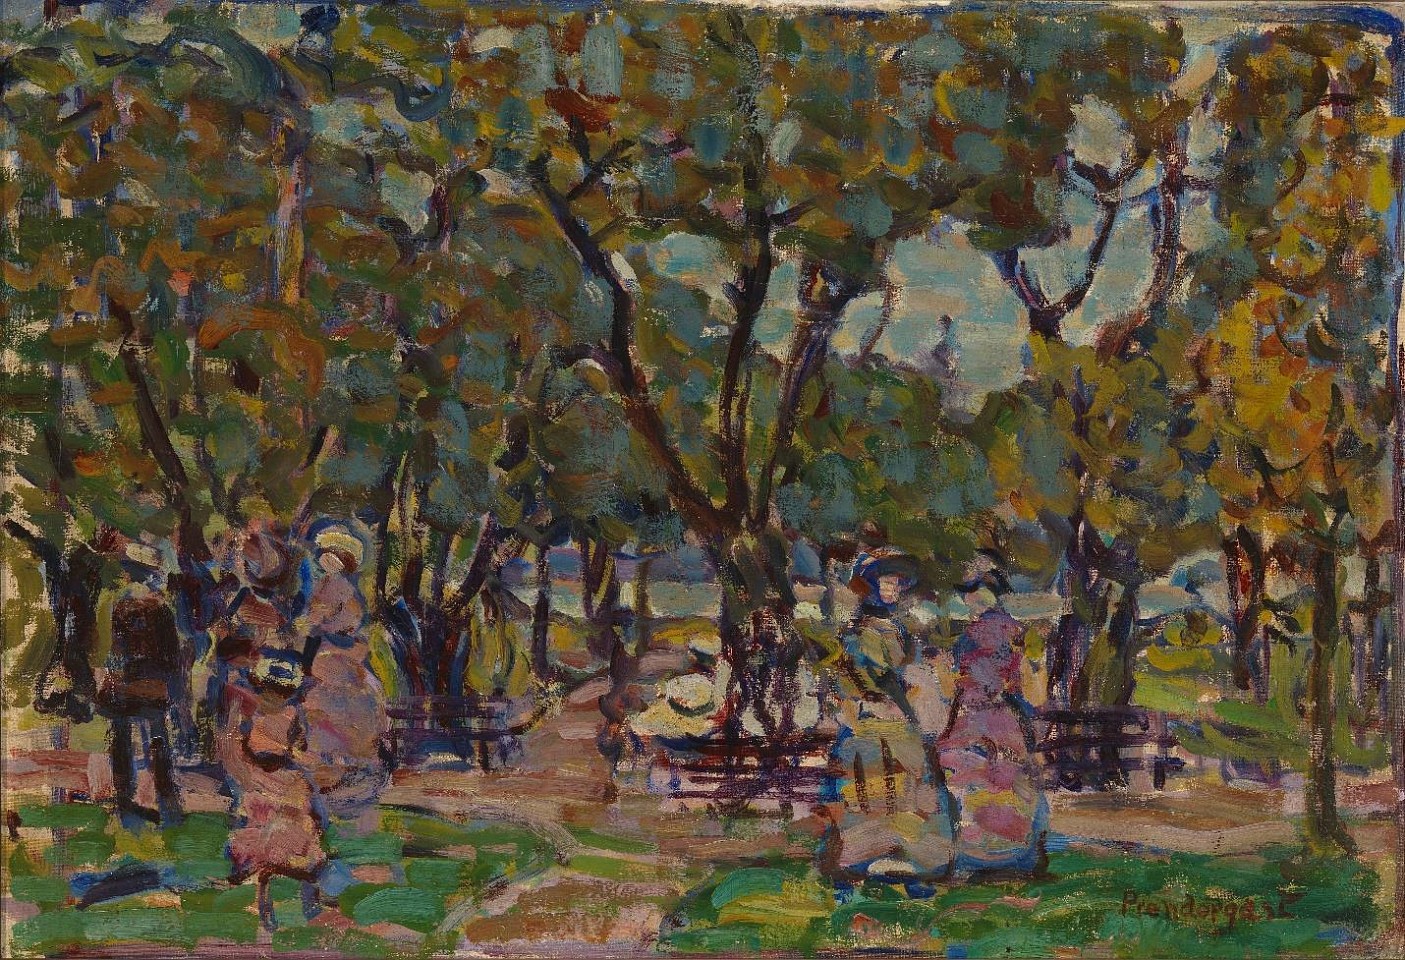 Maurice Prendergast, Figures under the Trees, c. 1907-10
oil on canvas, 16 1/8 x 23 1/2 in. (41 x 59.7 cm)